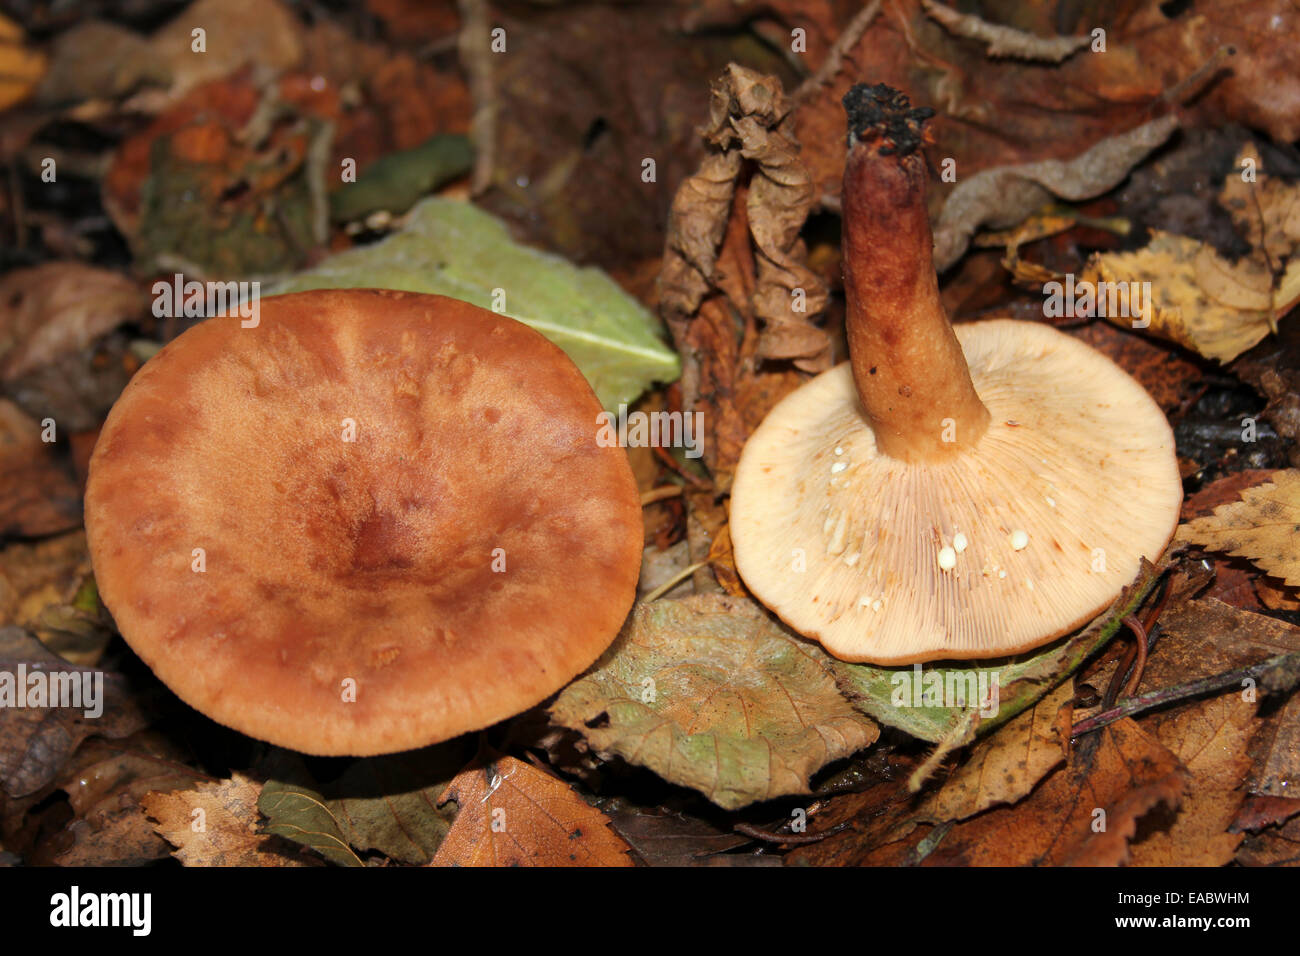 Milkcap Lactarius sp. showing the milky fluid ('latex') they exude when cut or damaged Stock Photo